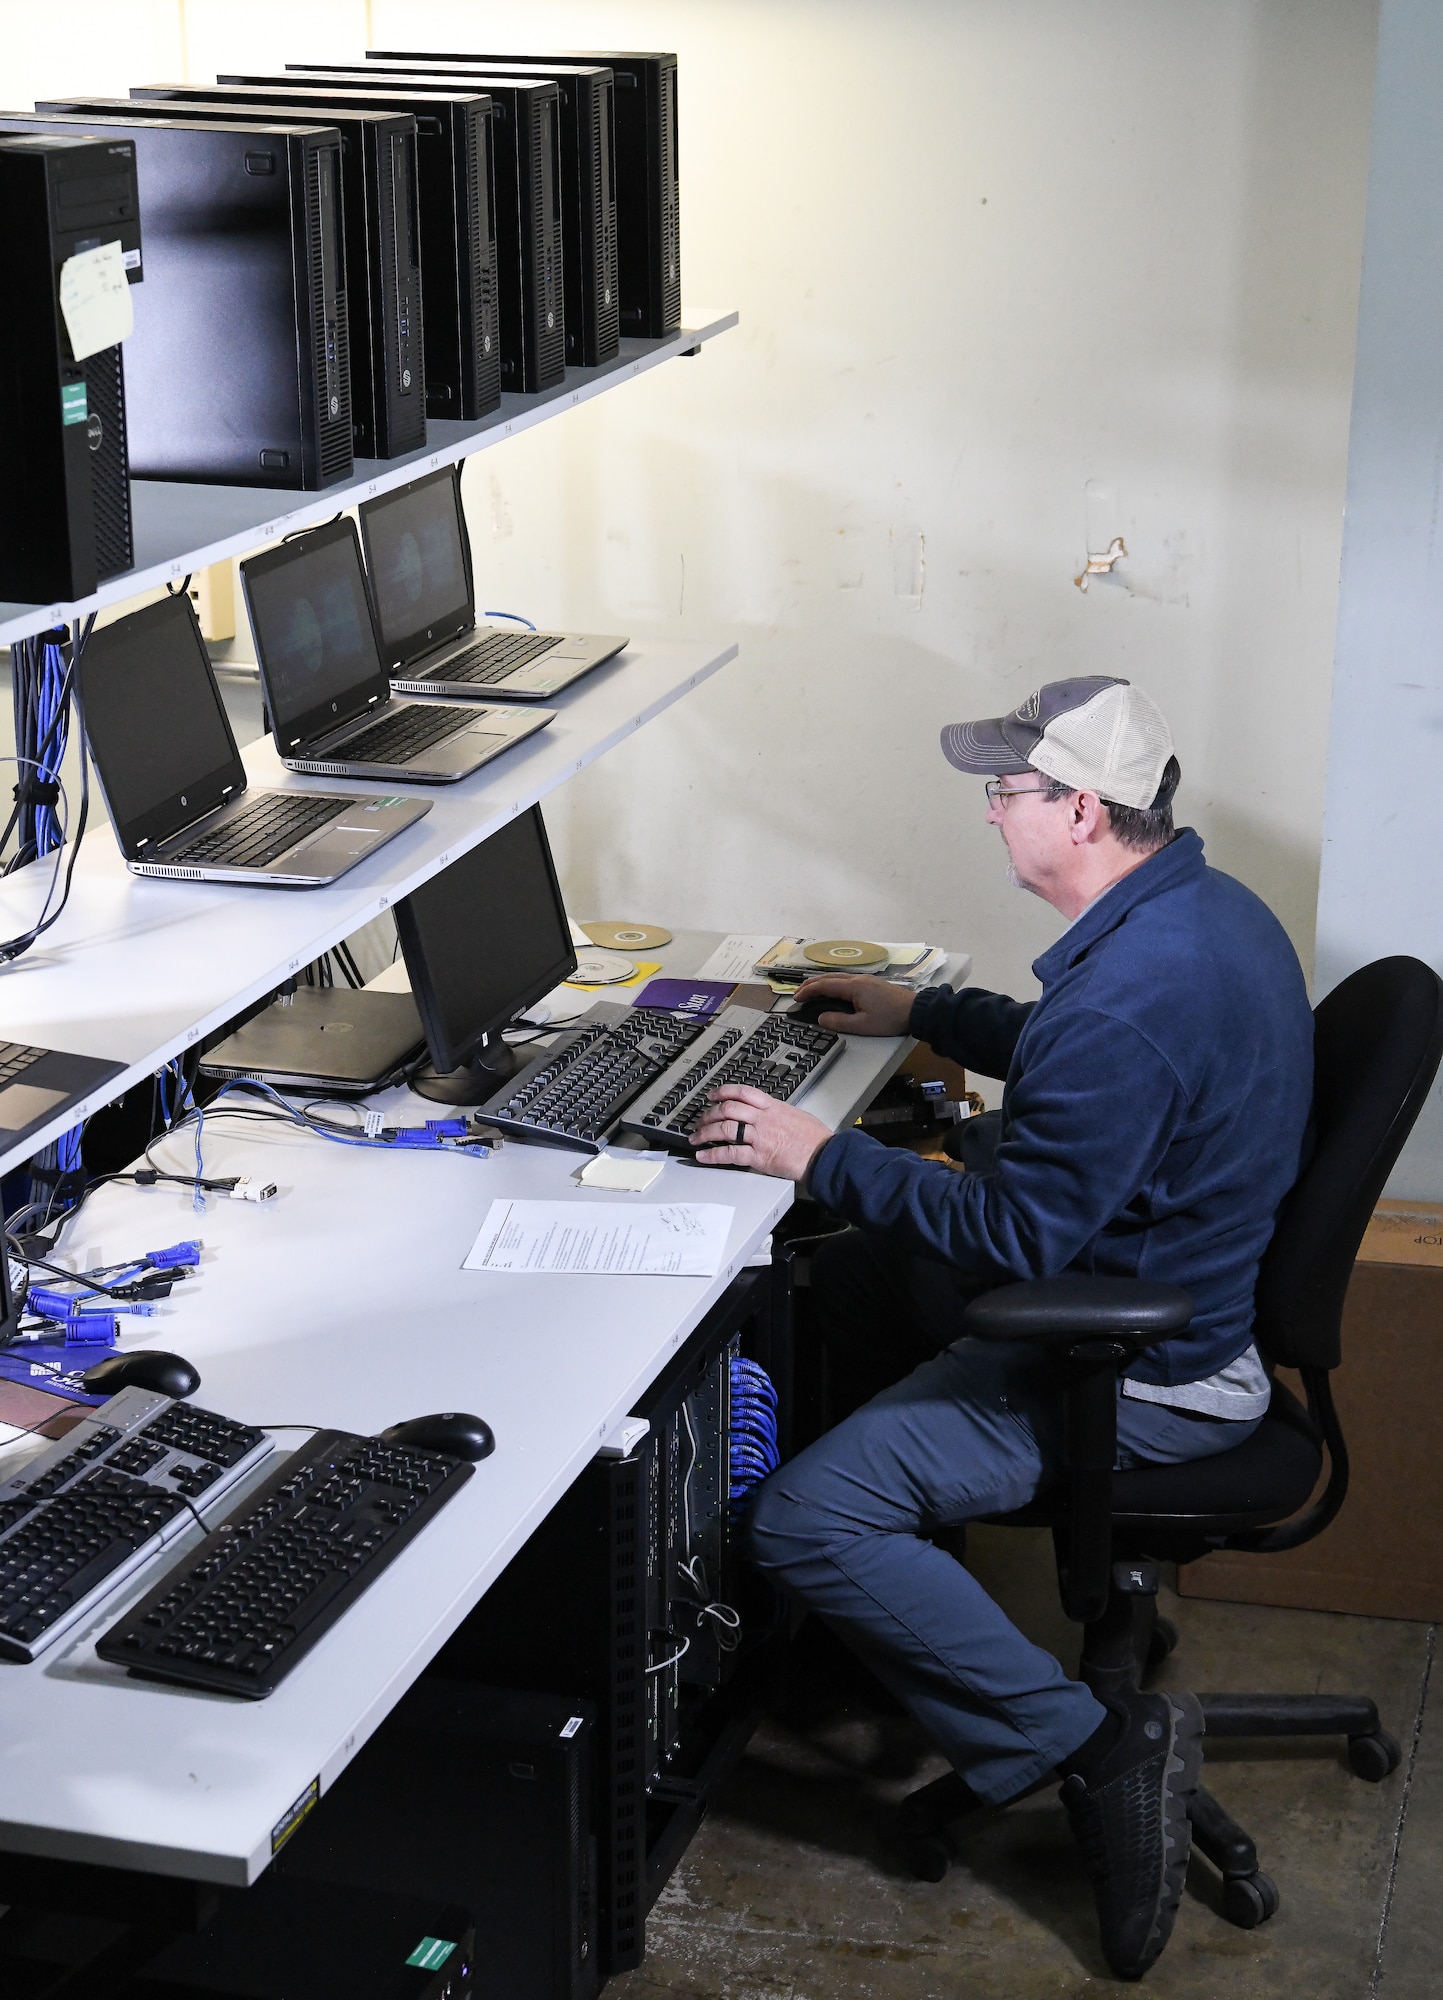 Troy Haywood, lead computer network technician, restages a computer for Non-Classified Internet Protocol Router Network, Dec. 12, 2019, in the PC Staging Area at Arnold Air Force Base, Tenn. Computers must be loaded with required software and necessary security protocols prior to being deployed for use by AEDC team members. (U.S. Air Force photo by Jill Pickett)